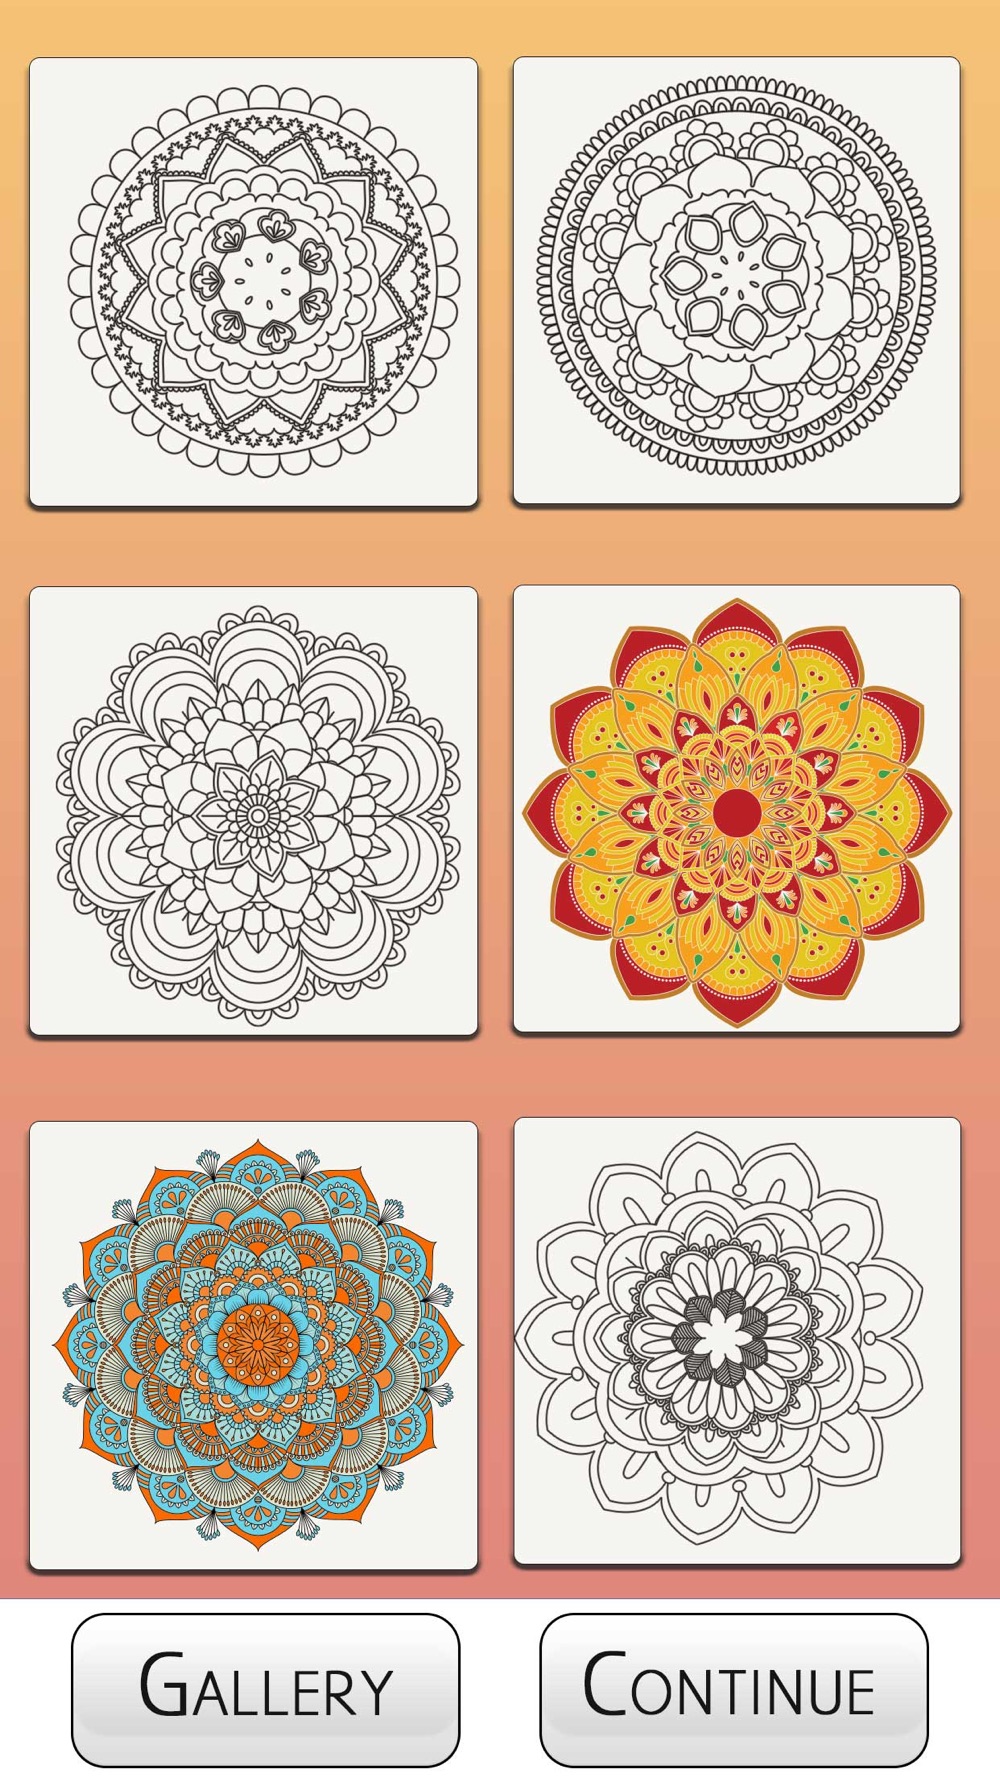 New Colorfy Artcoloring Games Free Download App For Iphone Steprimo Com